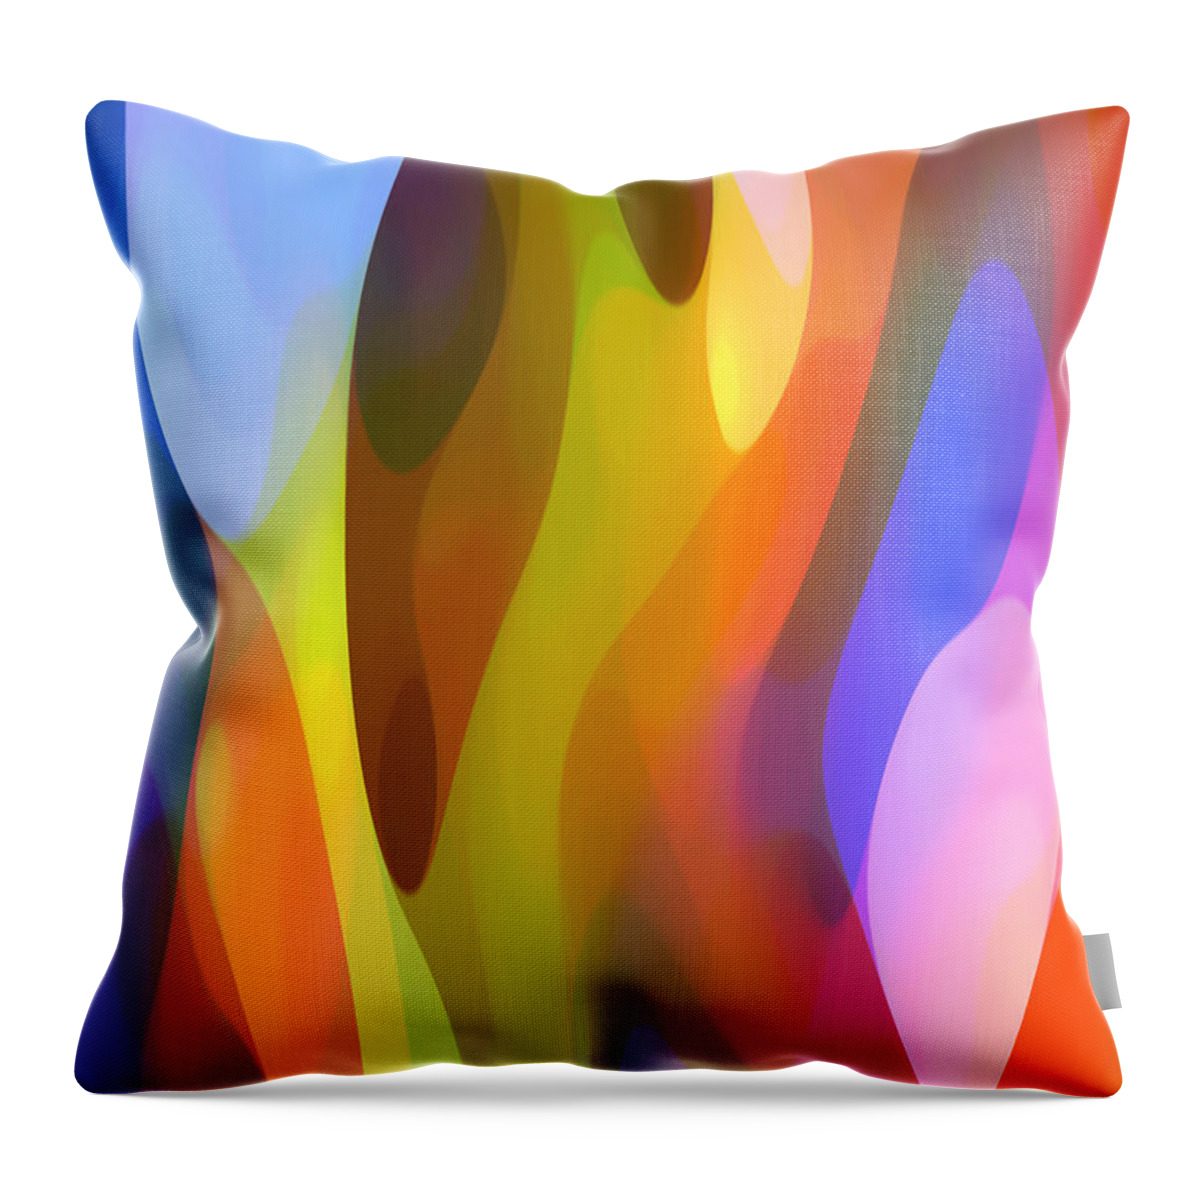 Abstract Art Throw Pillow featuring the painting Dappled Light 3 by Amy Vangsgard